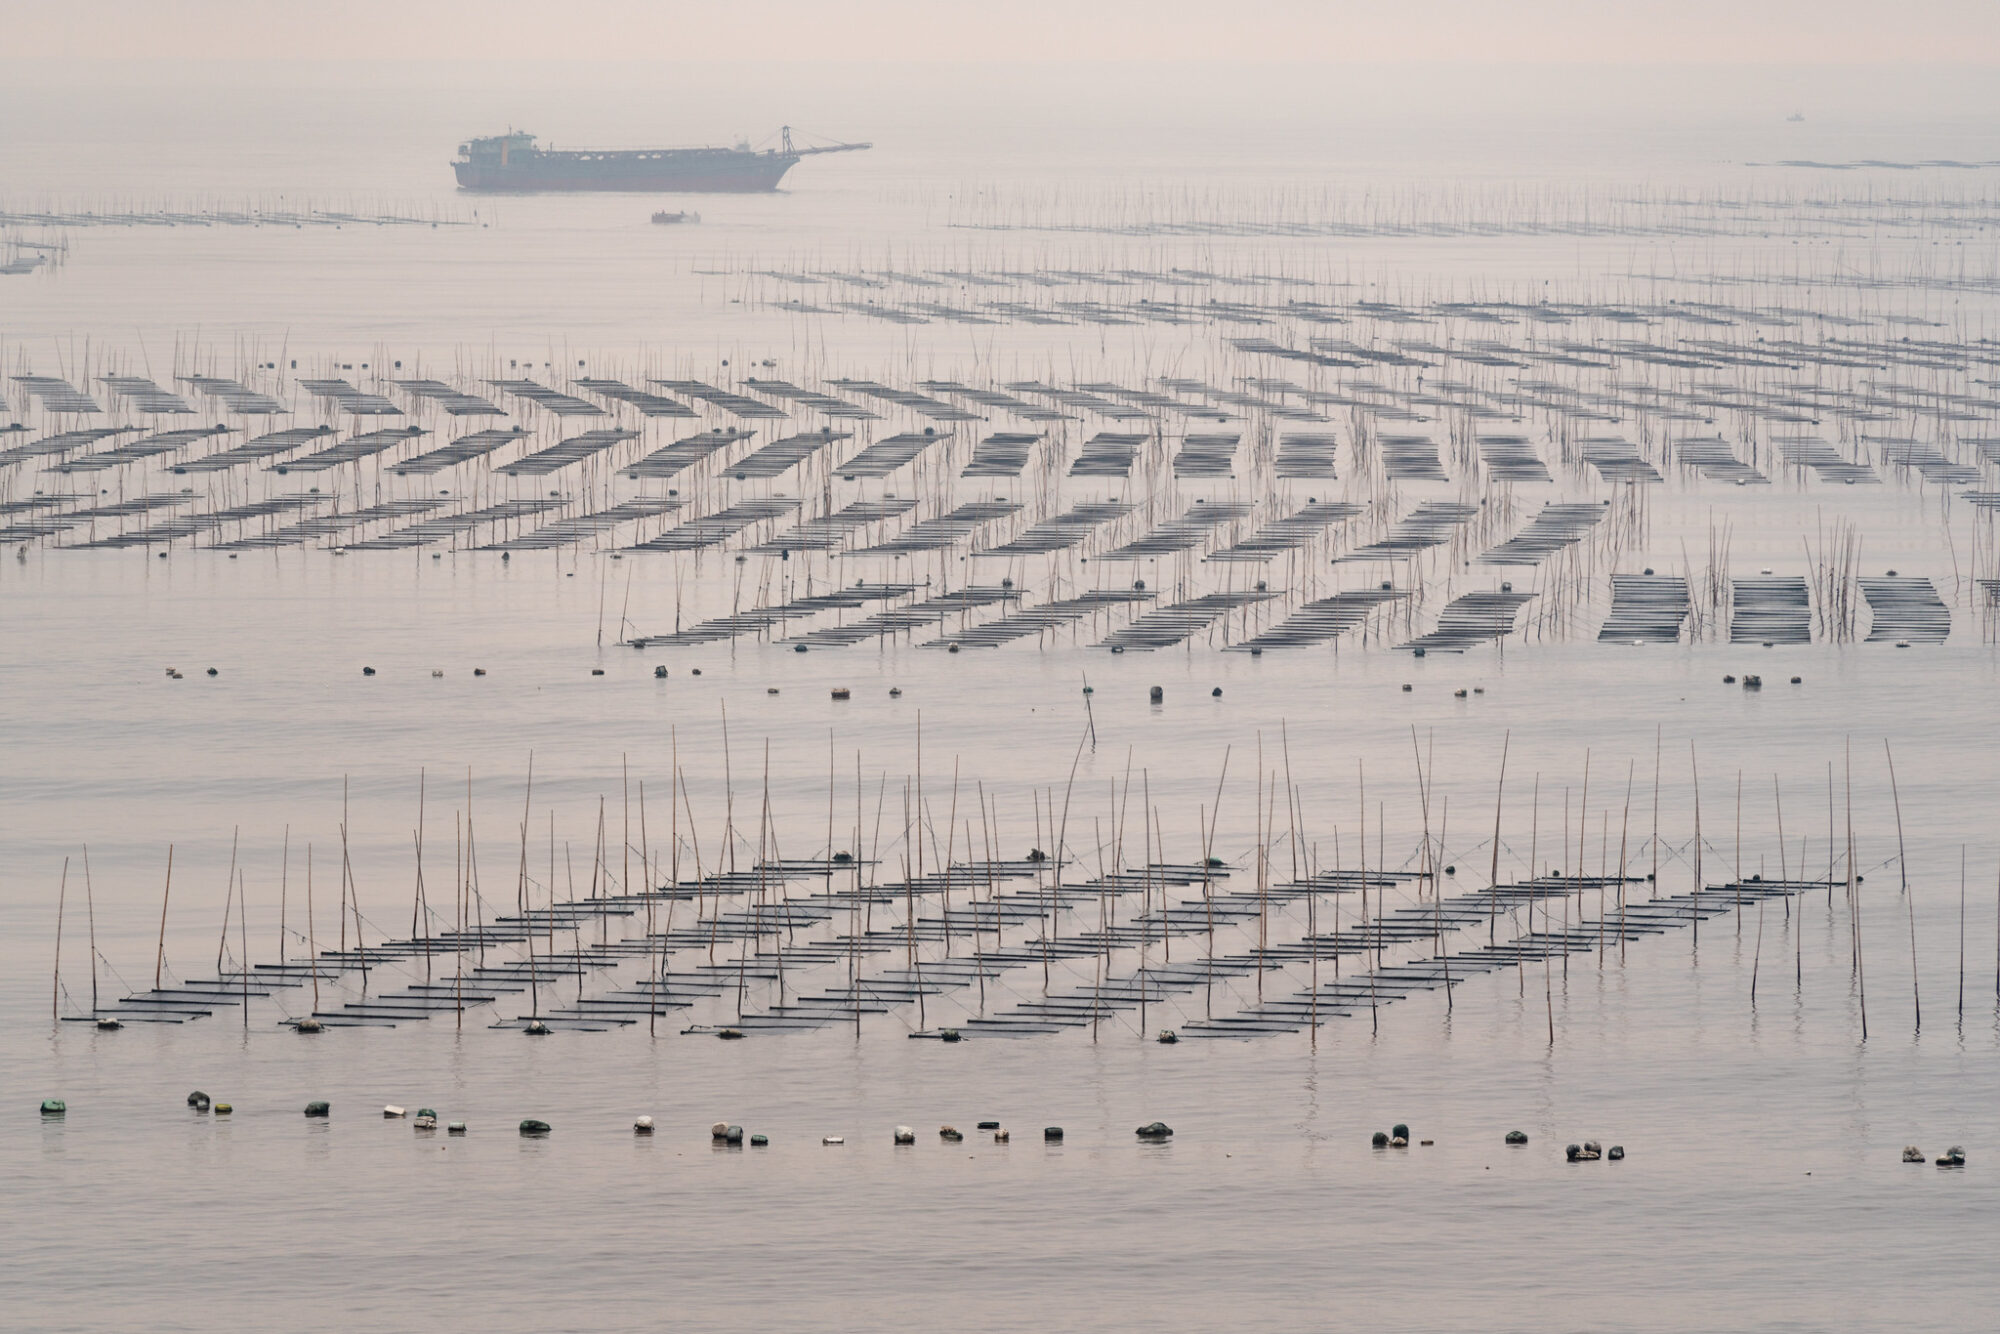 Rows of seaweed farms on ocean in China